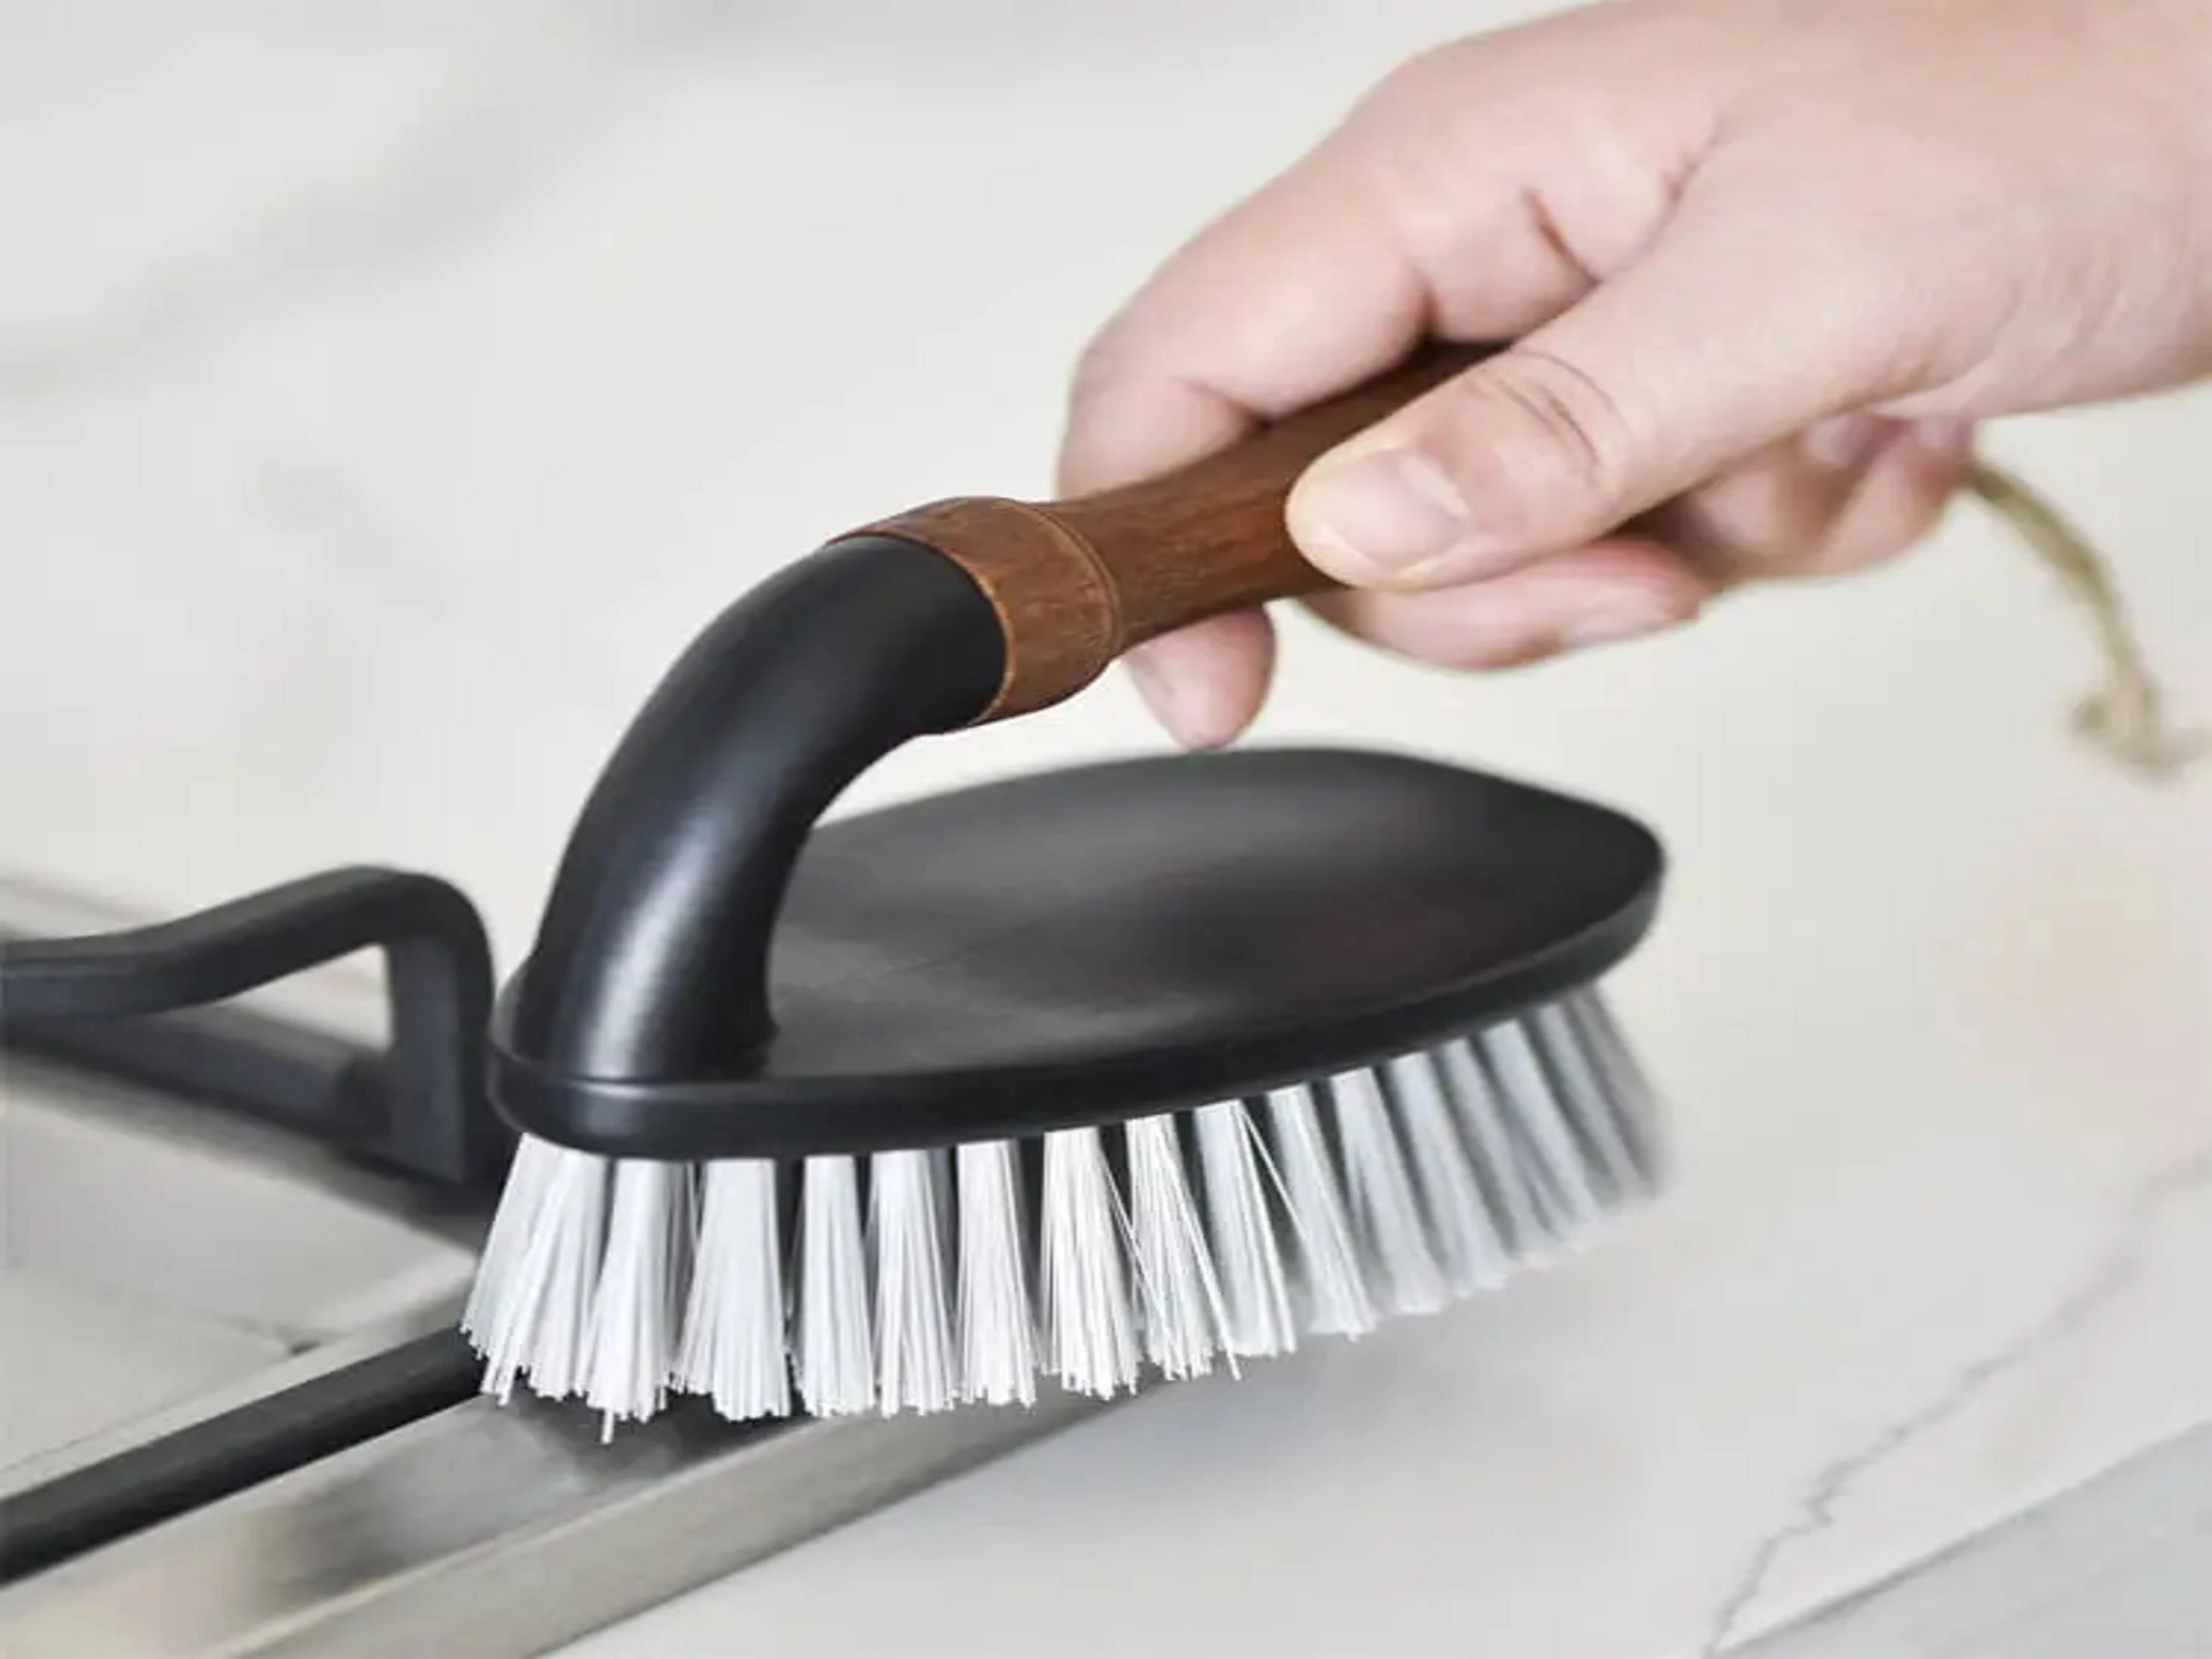 Durability and Cost: Finding the Best Value in Dish Cleaning Tools